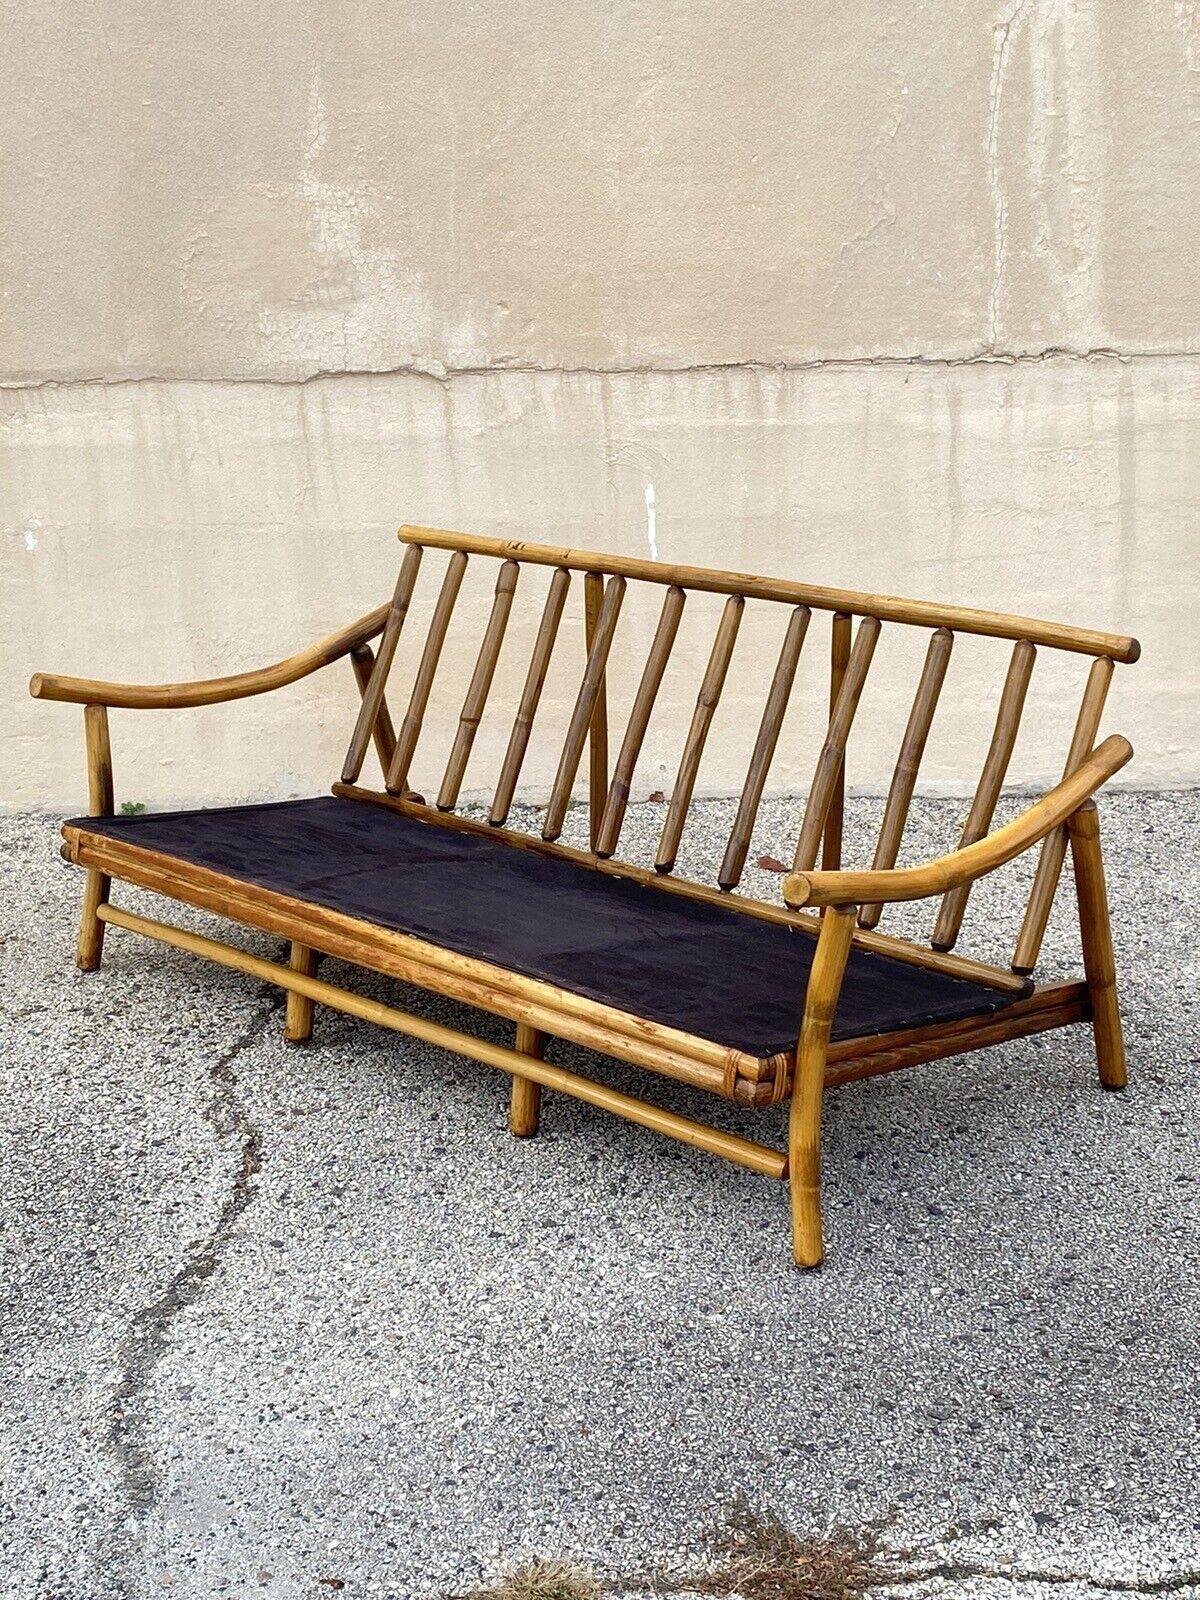 Vintage Ficks Reed Bamboo Rattan Tiki Sofa Set with Lounge Chairs - 3 Pc Set For Sale 4